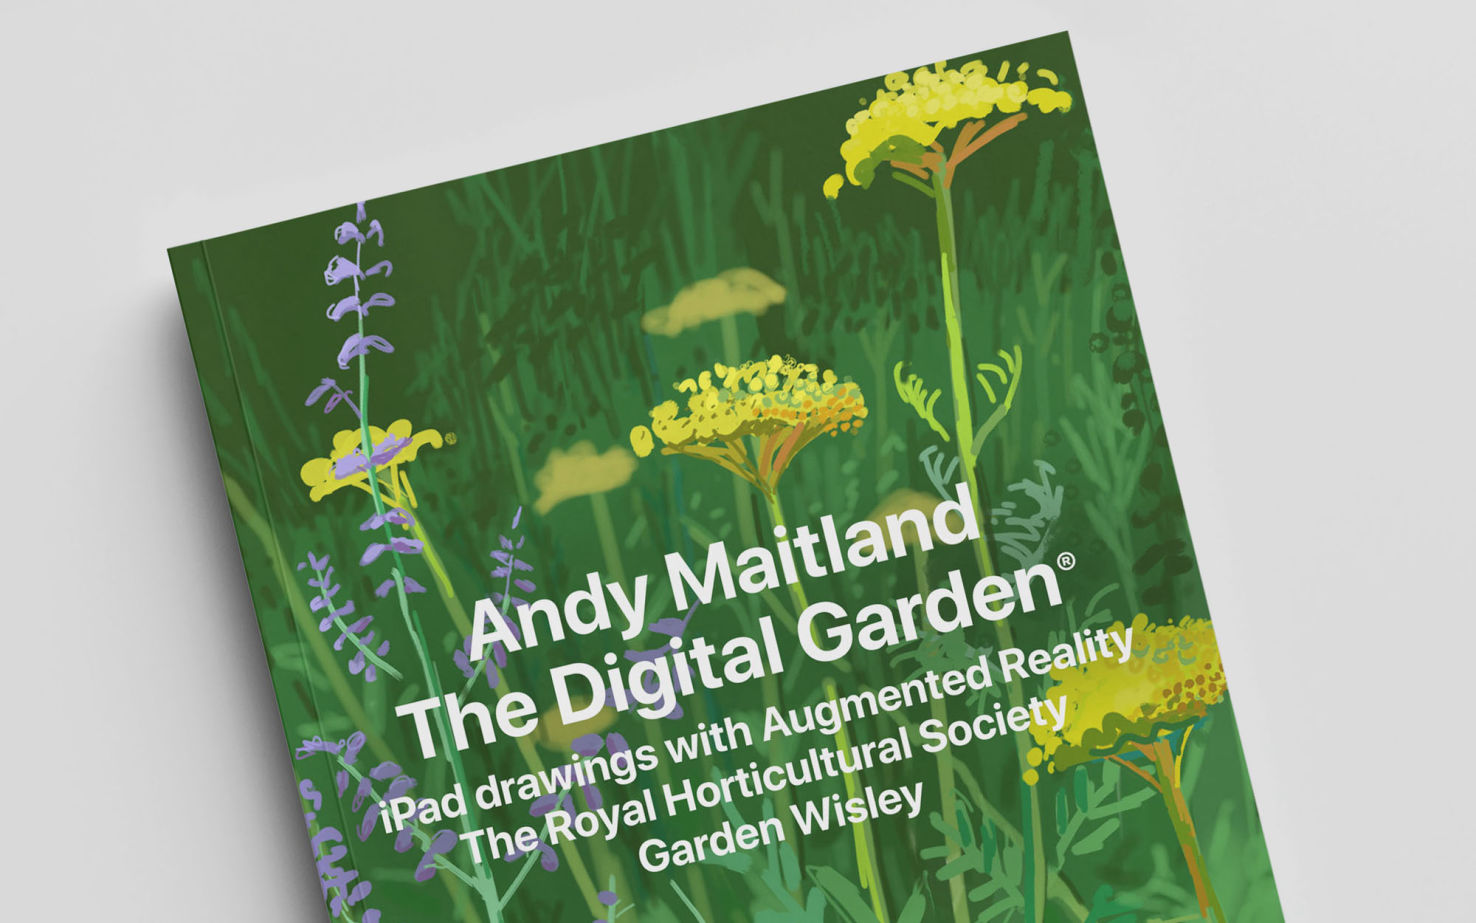 Digital exhibition book of 'The Digital Garden® 2018, iPad drawings with Augmented Reality (AR), The Royal Horticultural Society' by Andy Maitland, iPad artist